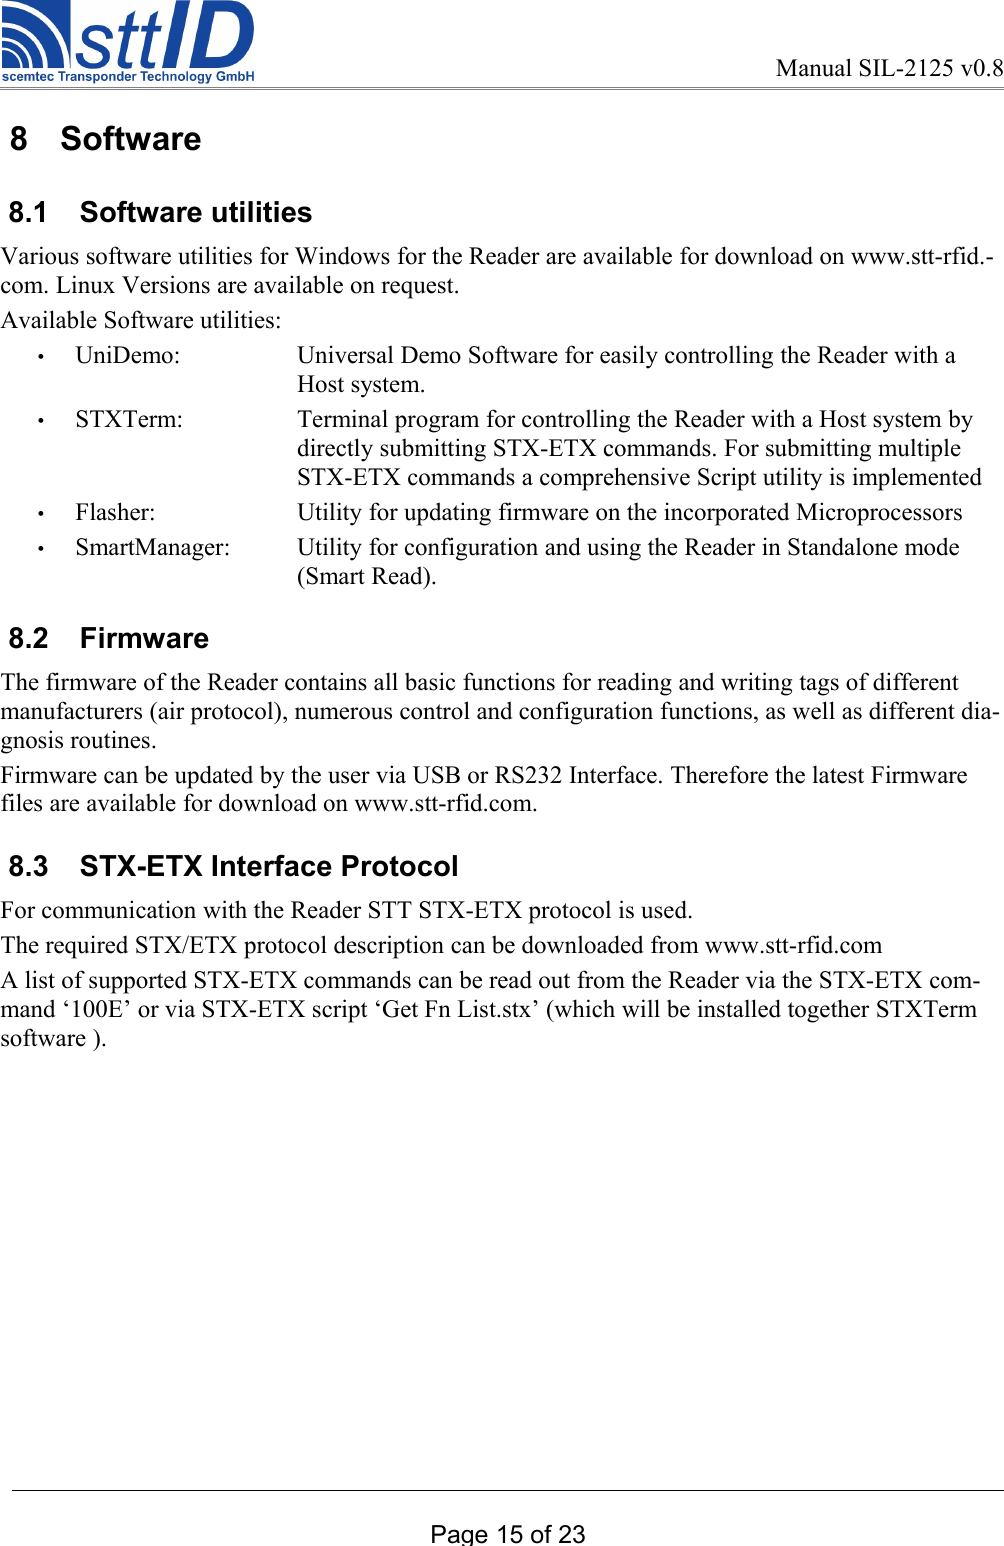 Manual SIL-2125 v0.8 8  Software 8.1  Software utilitiesVarious software utilities for Windows for the Reader are available for download on www.stt-rfid.-com. Linux Versions are available on request.Available Software utilities:•UniDemo: Universal Demo Software for easily controlling the Reader with a Host system.•STXTerm: Terminal program for controlling the Reader with a Host system by directly submitting STX-ETX commands. For submitting multiple STX-ETX commands a comprehensive Script utility is implemented•Flasher: Utility for updating firmware on the incorporated Microprocessors•SmartManager: Utility for configuration and using the Reader in Standalone mode (Smart Read). 8.2  Firmware The firmware of the Reader contains all basic functions for reading and writing tags of different manufacturers (air protocol), numerous control and configuration functions, as well as different dia-gnosis routines.Firmware can be updated by the user via USB or RS232 Interface. Therefore the latest Firmware files are available for download on www.stt-rfid.com. 8.3  STX-ETX Interface Protocol For communication with the Reader STT STX-ETX protocol is used.The required STX/ETX protocol description can be downloaded from www.stt-rfid.comA list of supported STX-ETX commands can be read out from the Reader via the STX-ETX com-mand ‘100E’ or via STX-ETX script ‘Get Fn List.stx’ (which will be installed together STXTerm software ). Page 15 of 23